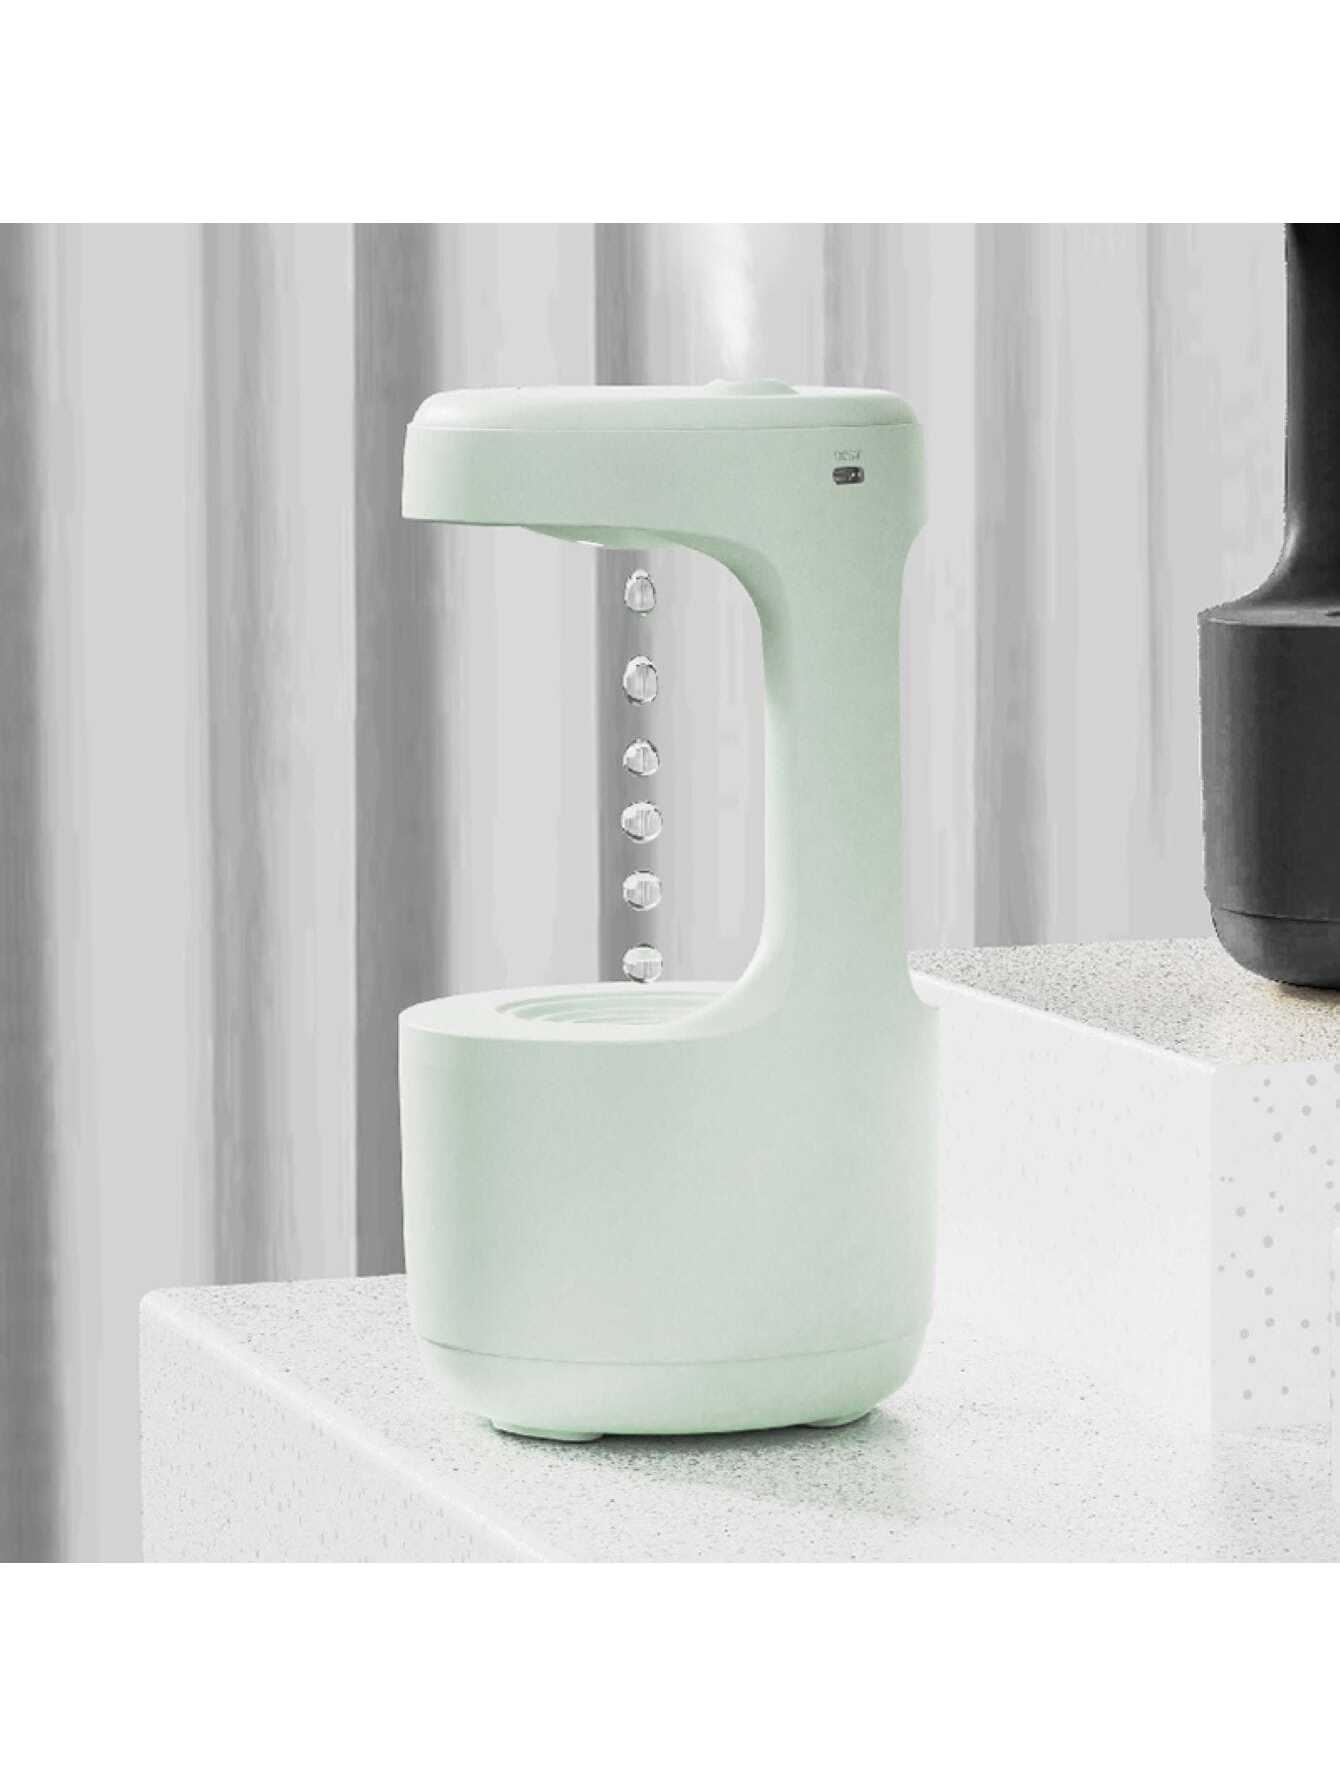 1pc 800ml Usb-powered Aroma Humidifier Lz599-1, With Anti-gravity Water Droplet Backflow Design, Suitable For Home And Office Humidification-light green-1